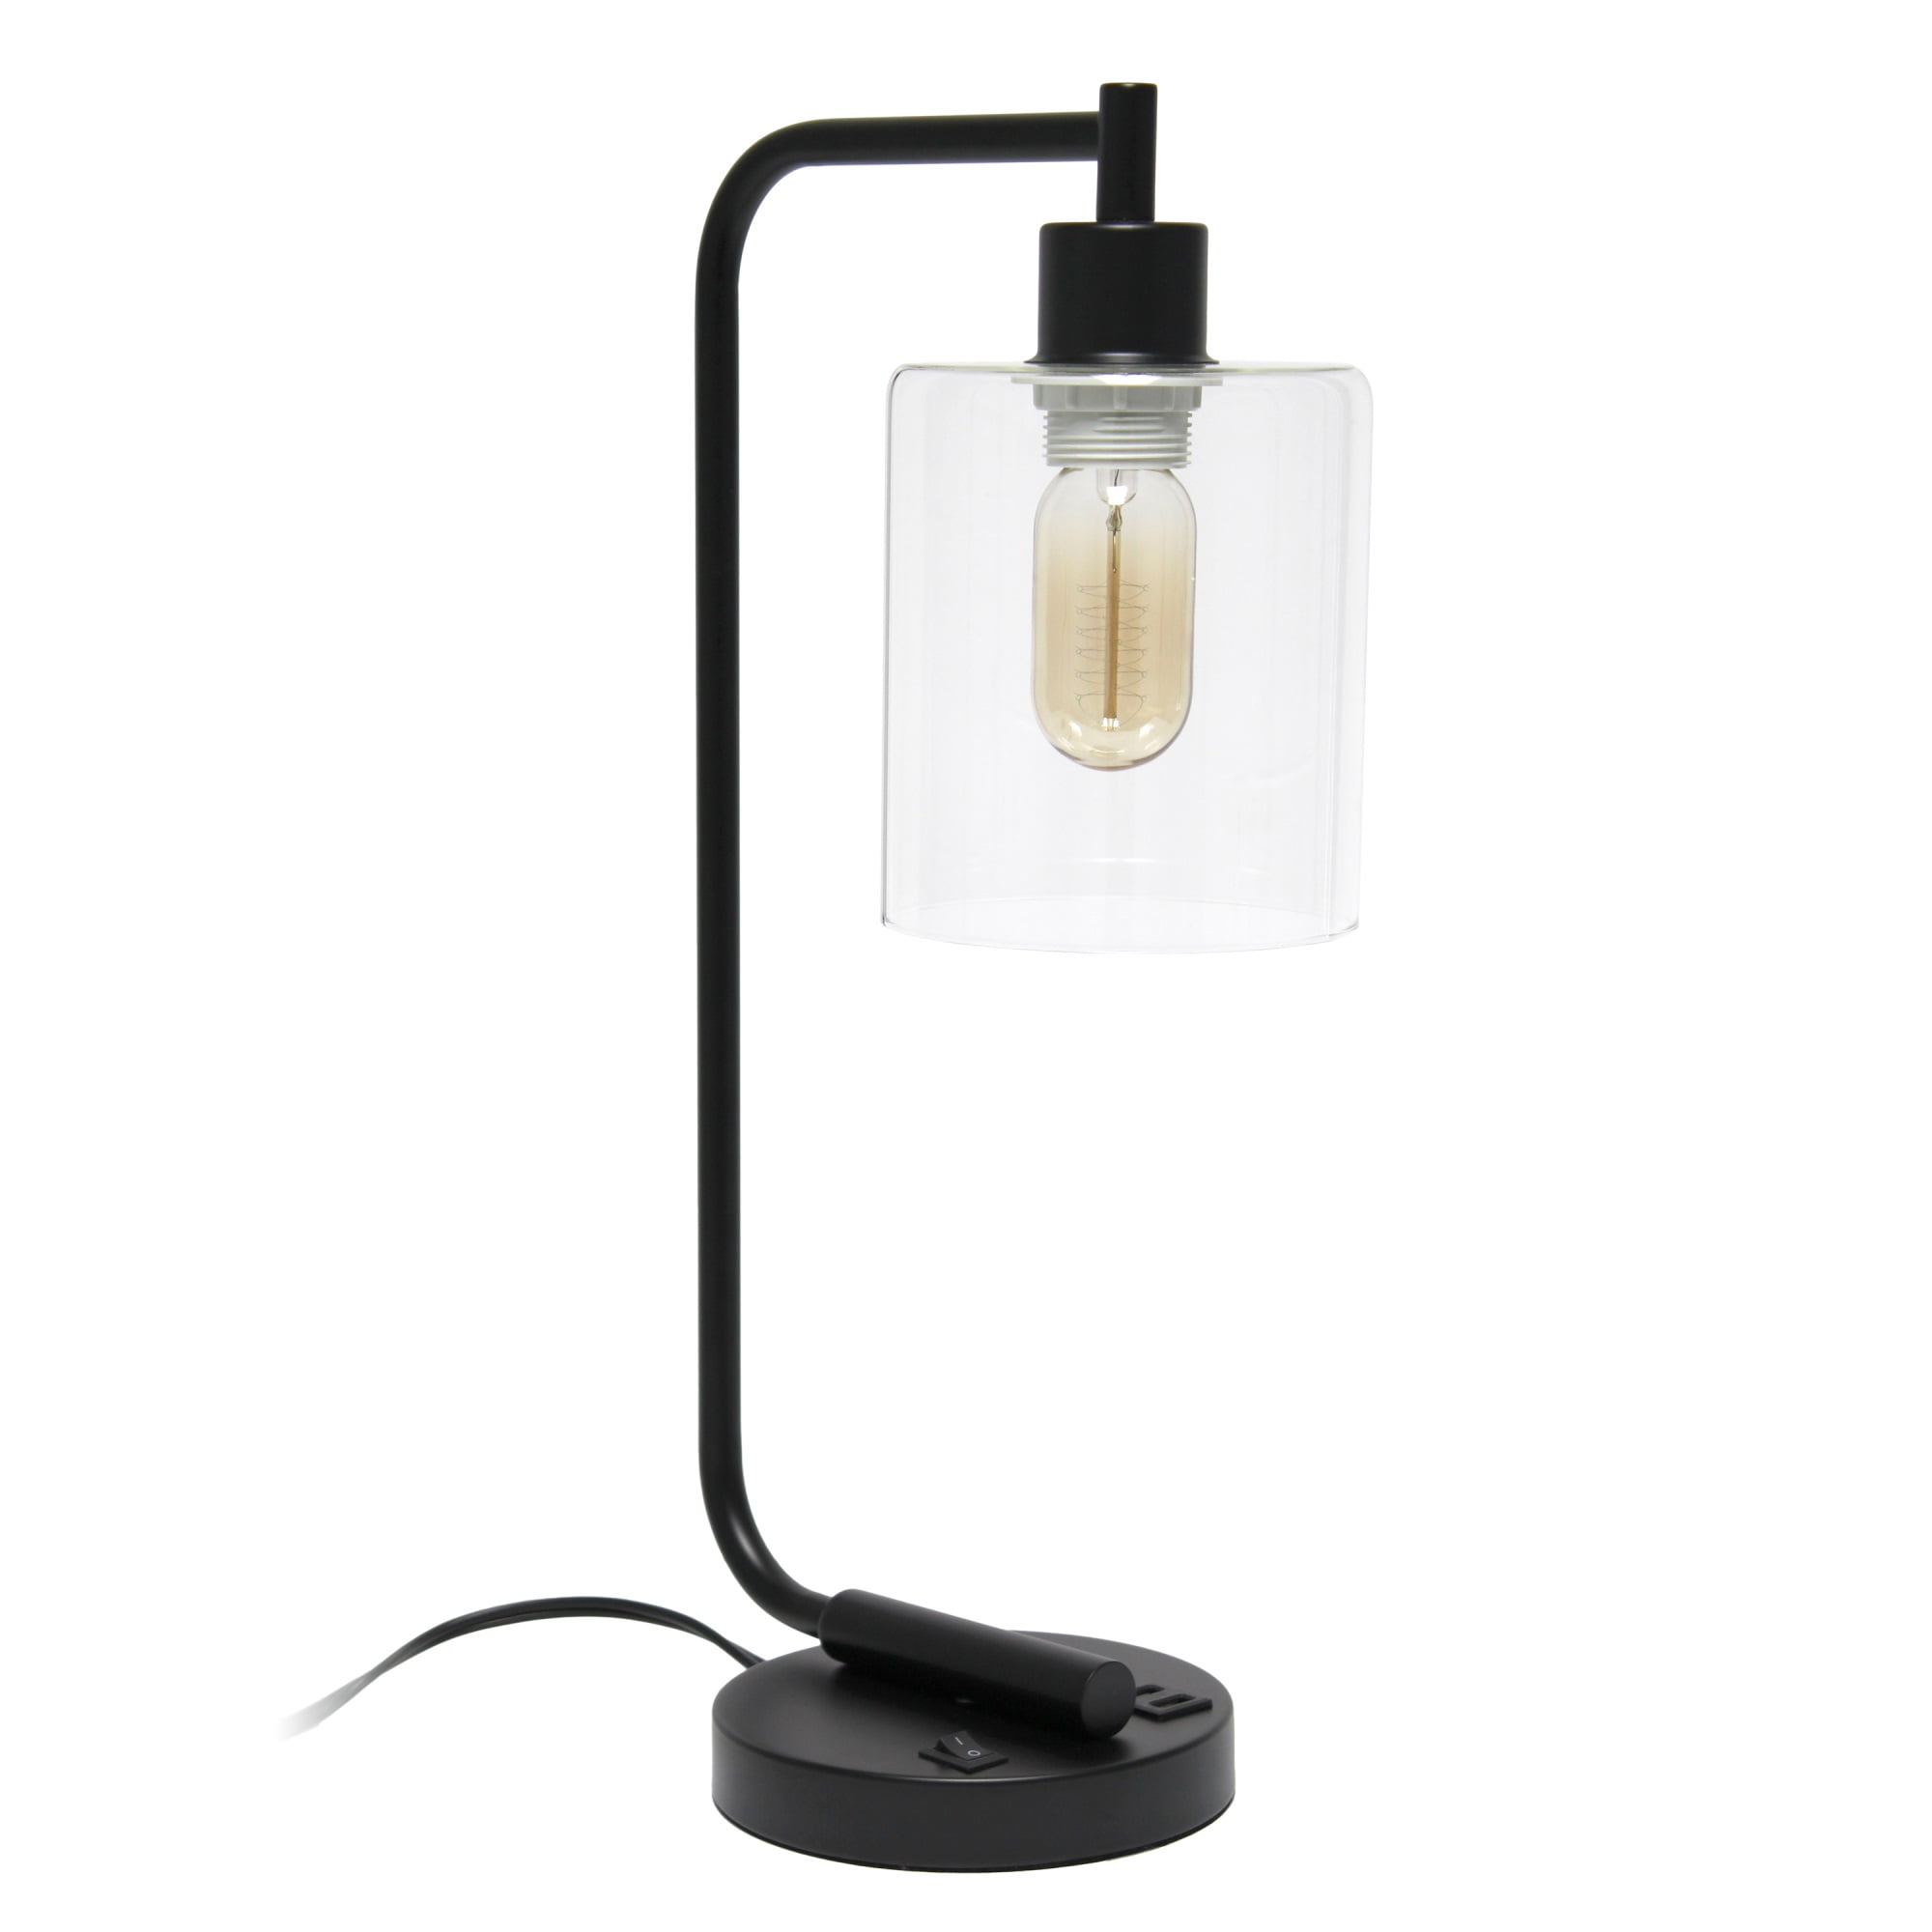 Lalia Home Modern Iron Desk Lamp with USB Port and Glass Shade, Black